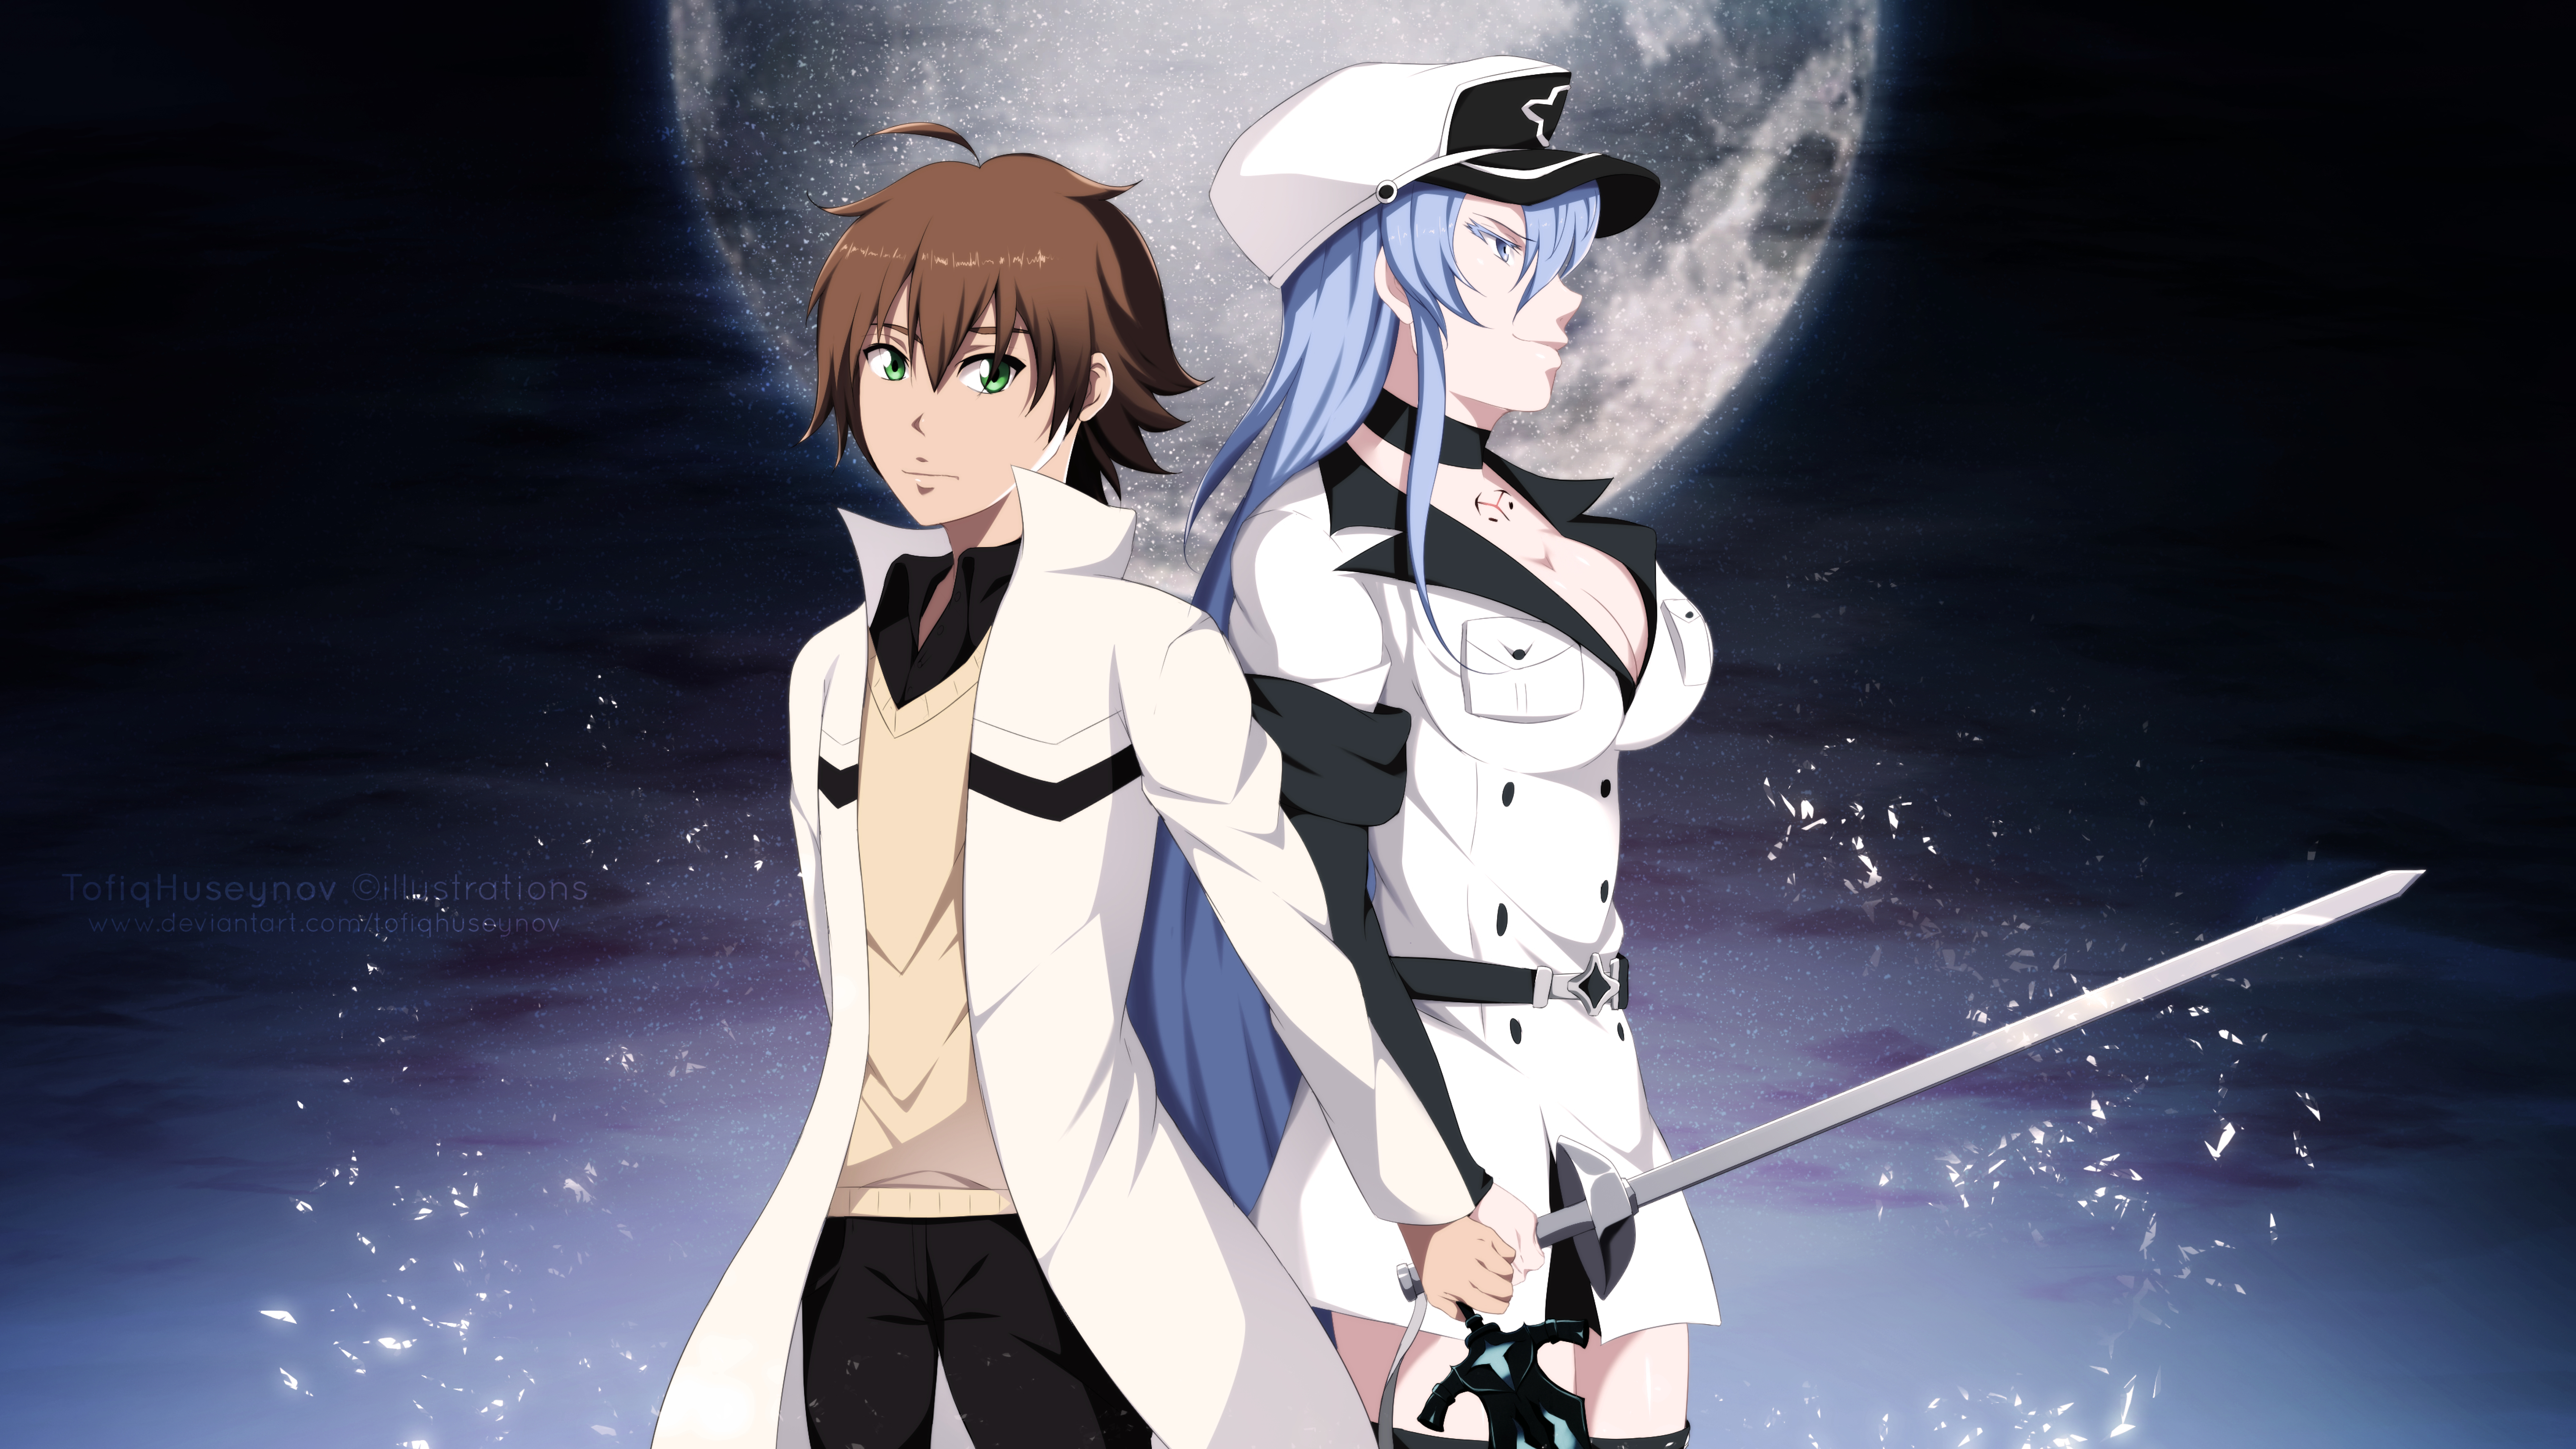 Download Esdeath Akame Ga Kill wallpapers for mobile phone free  Esdeath Akame Ga Kill HD pictures